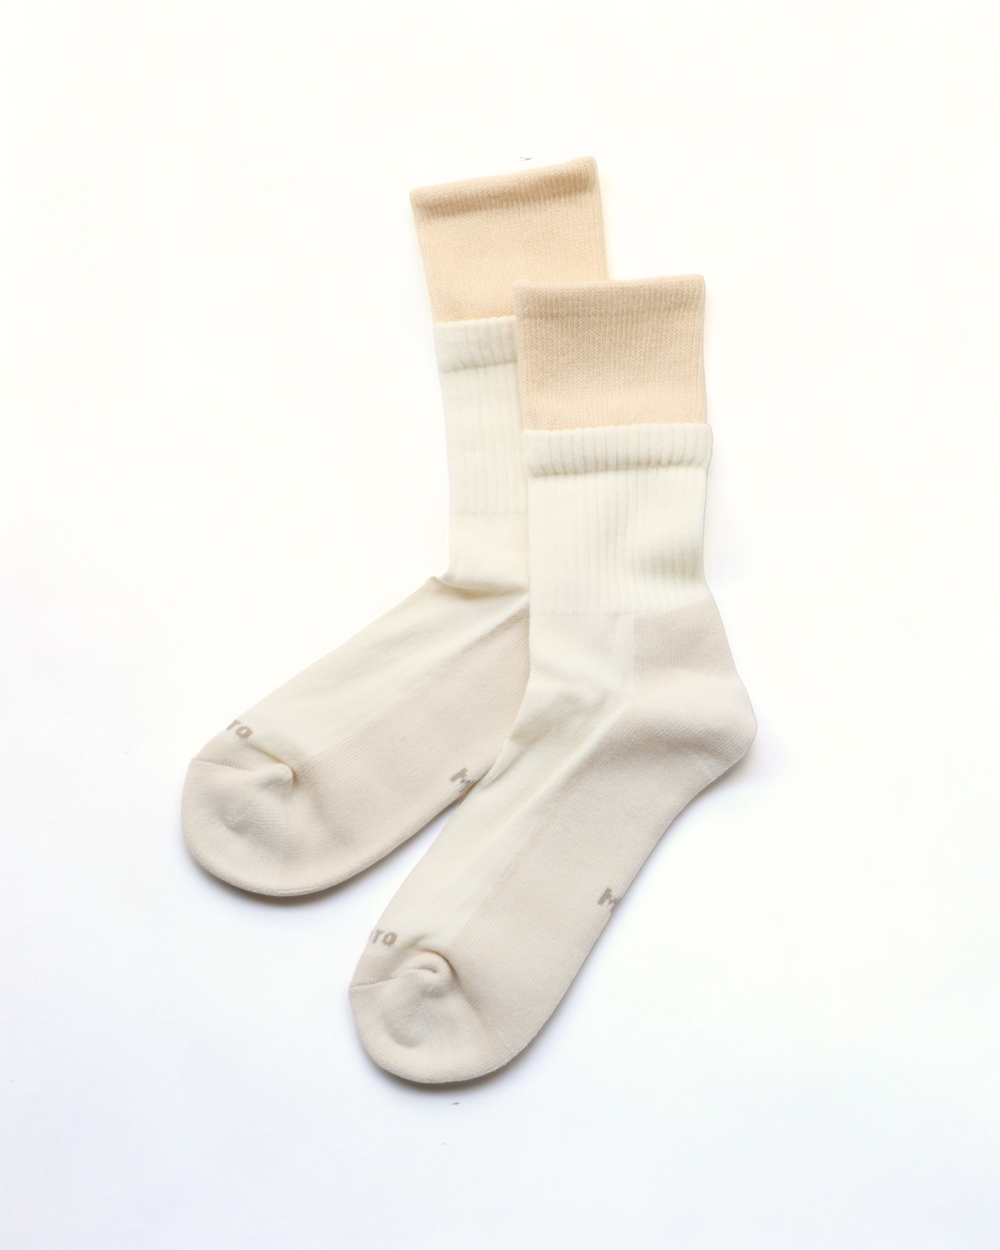 R1421 ORGANIC COTTON DOUBLE LAYER CREW SOCKS - Ivory/Offwhite